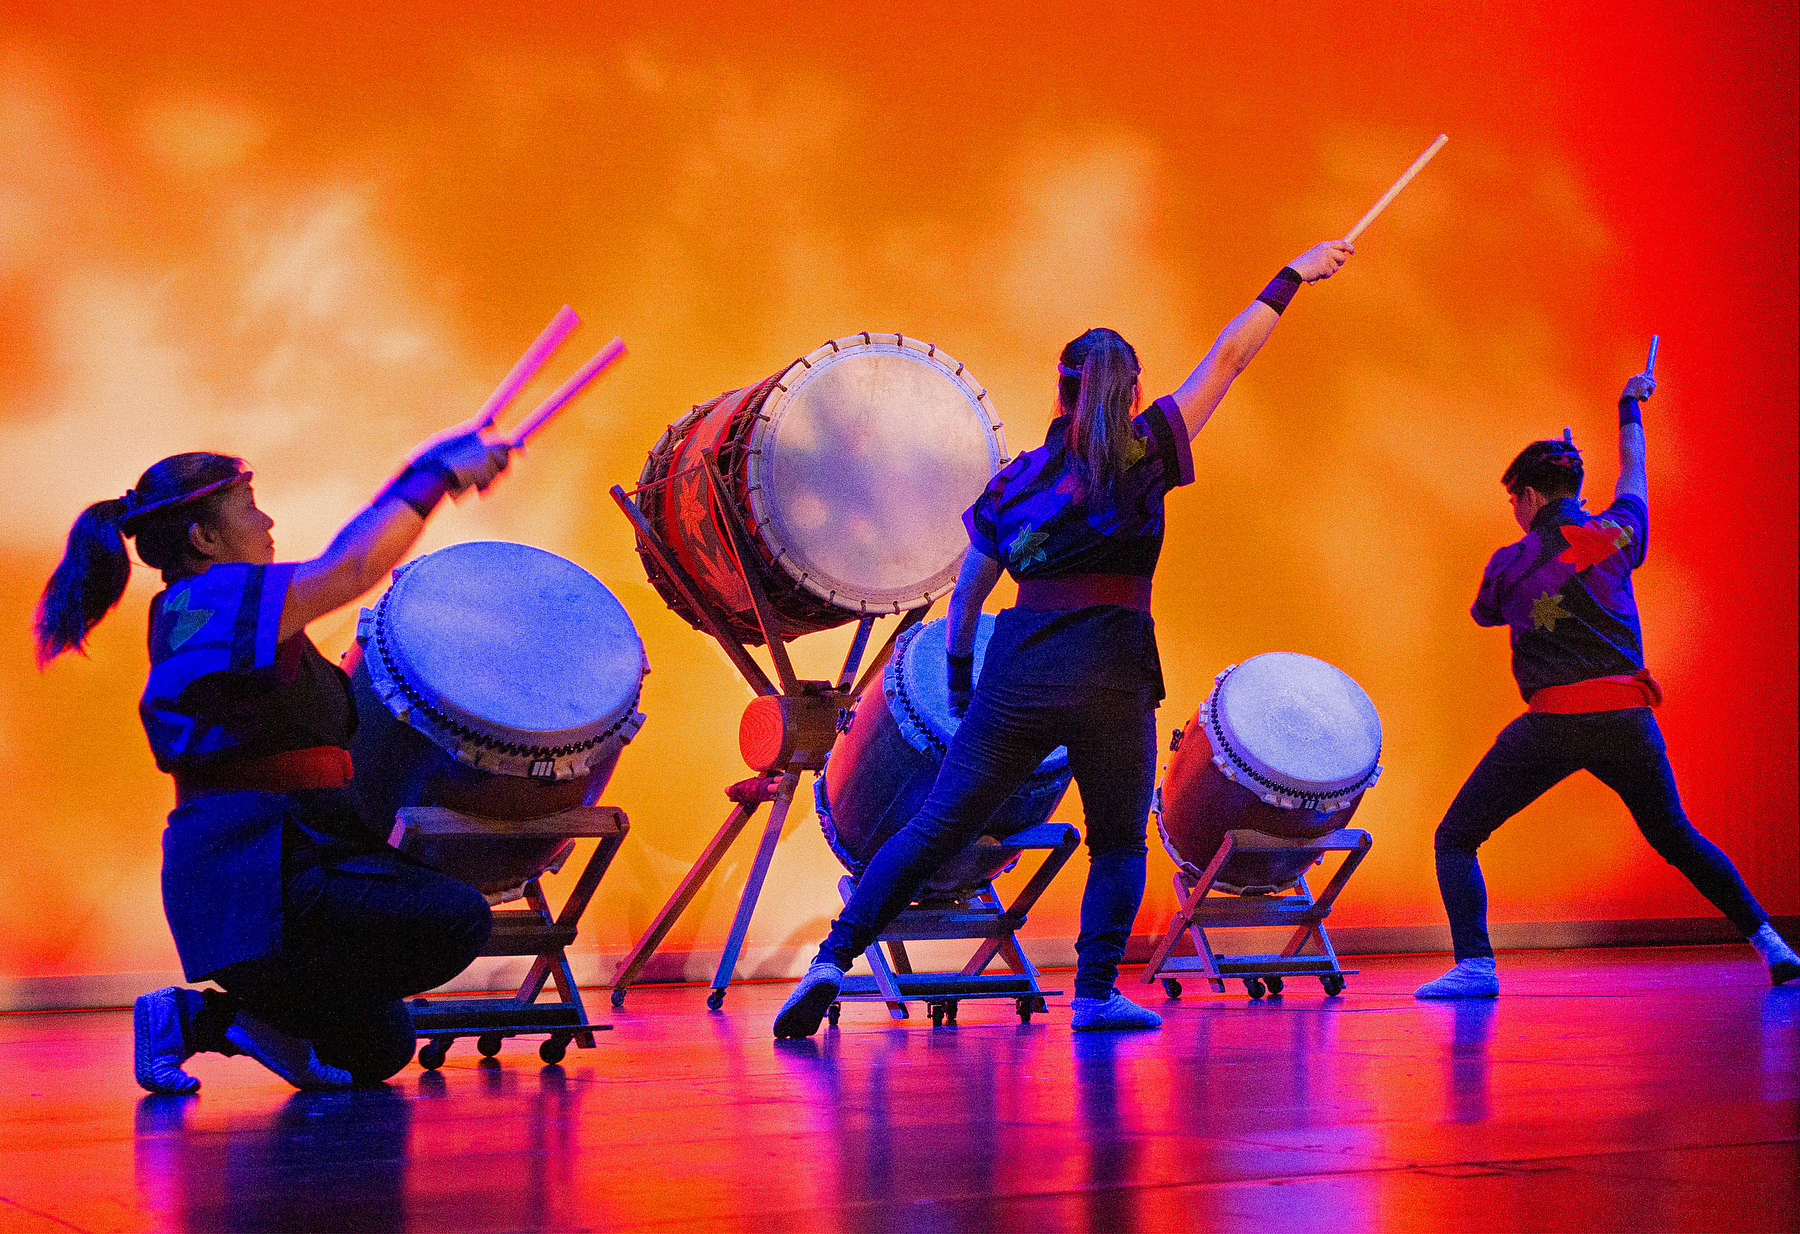 San Jose Taiko performed as part of the ARTSwego performing arts series on March 6 in Waterman Theatre. Image shows three performers with large drums.